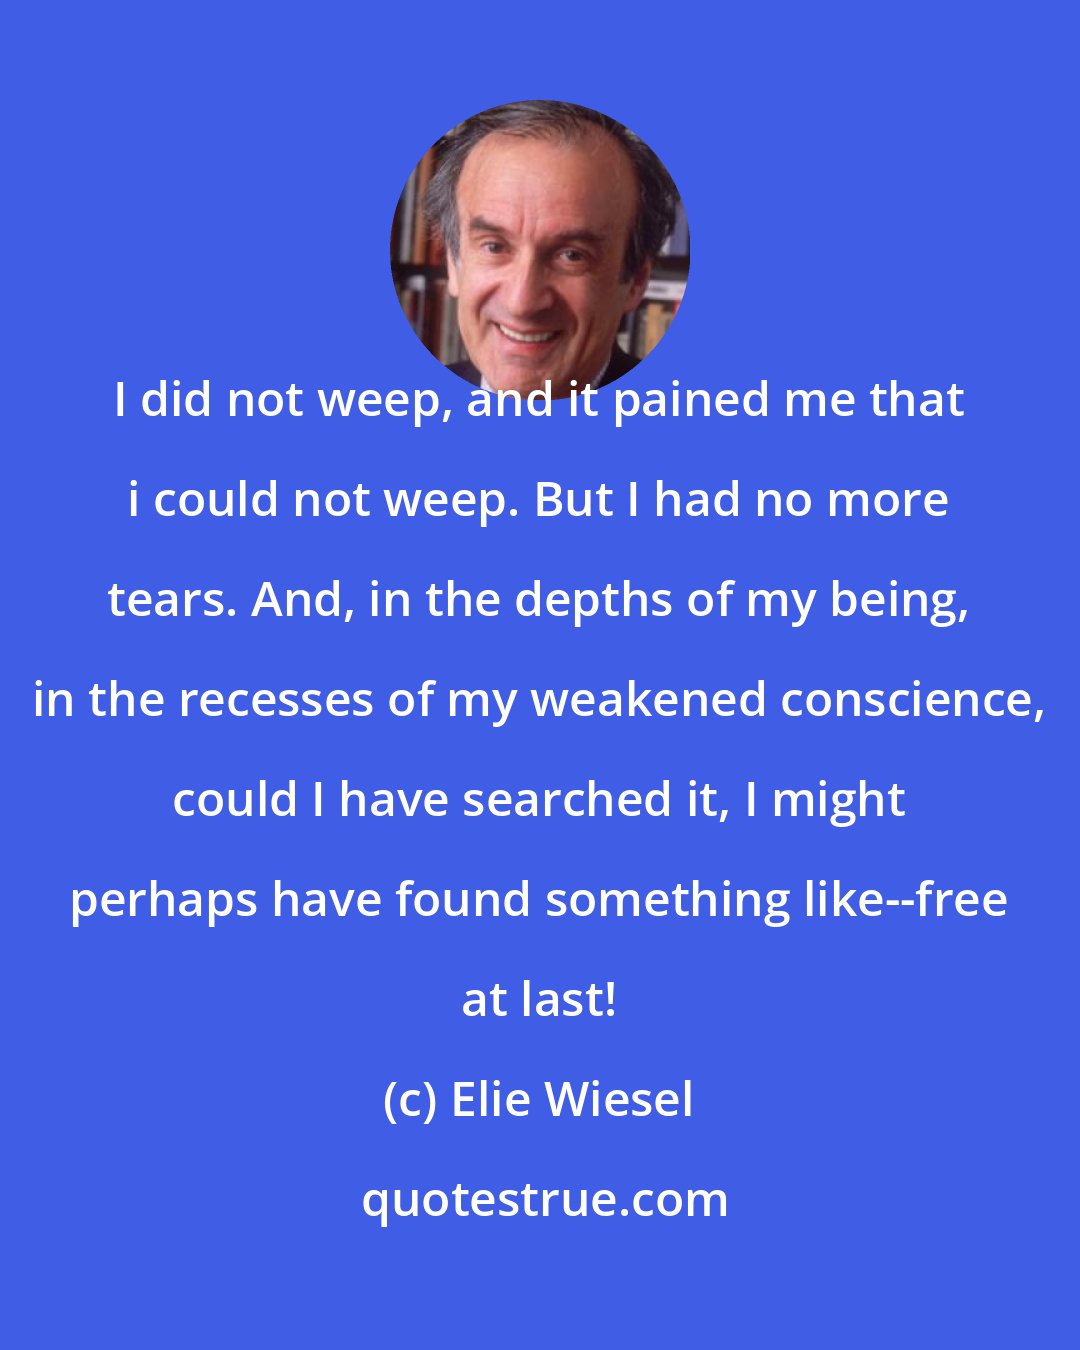 Elie Wiesel: I did not weep, and it pained me that i could not weep. But I had no more tears. And, in the depths of my being, in the recesses of my weakened conscience, could I have searched it, I might perhaps have found something like--free at last!